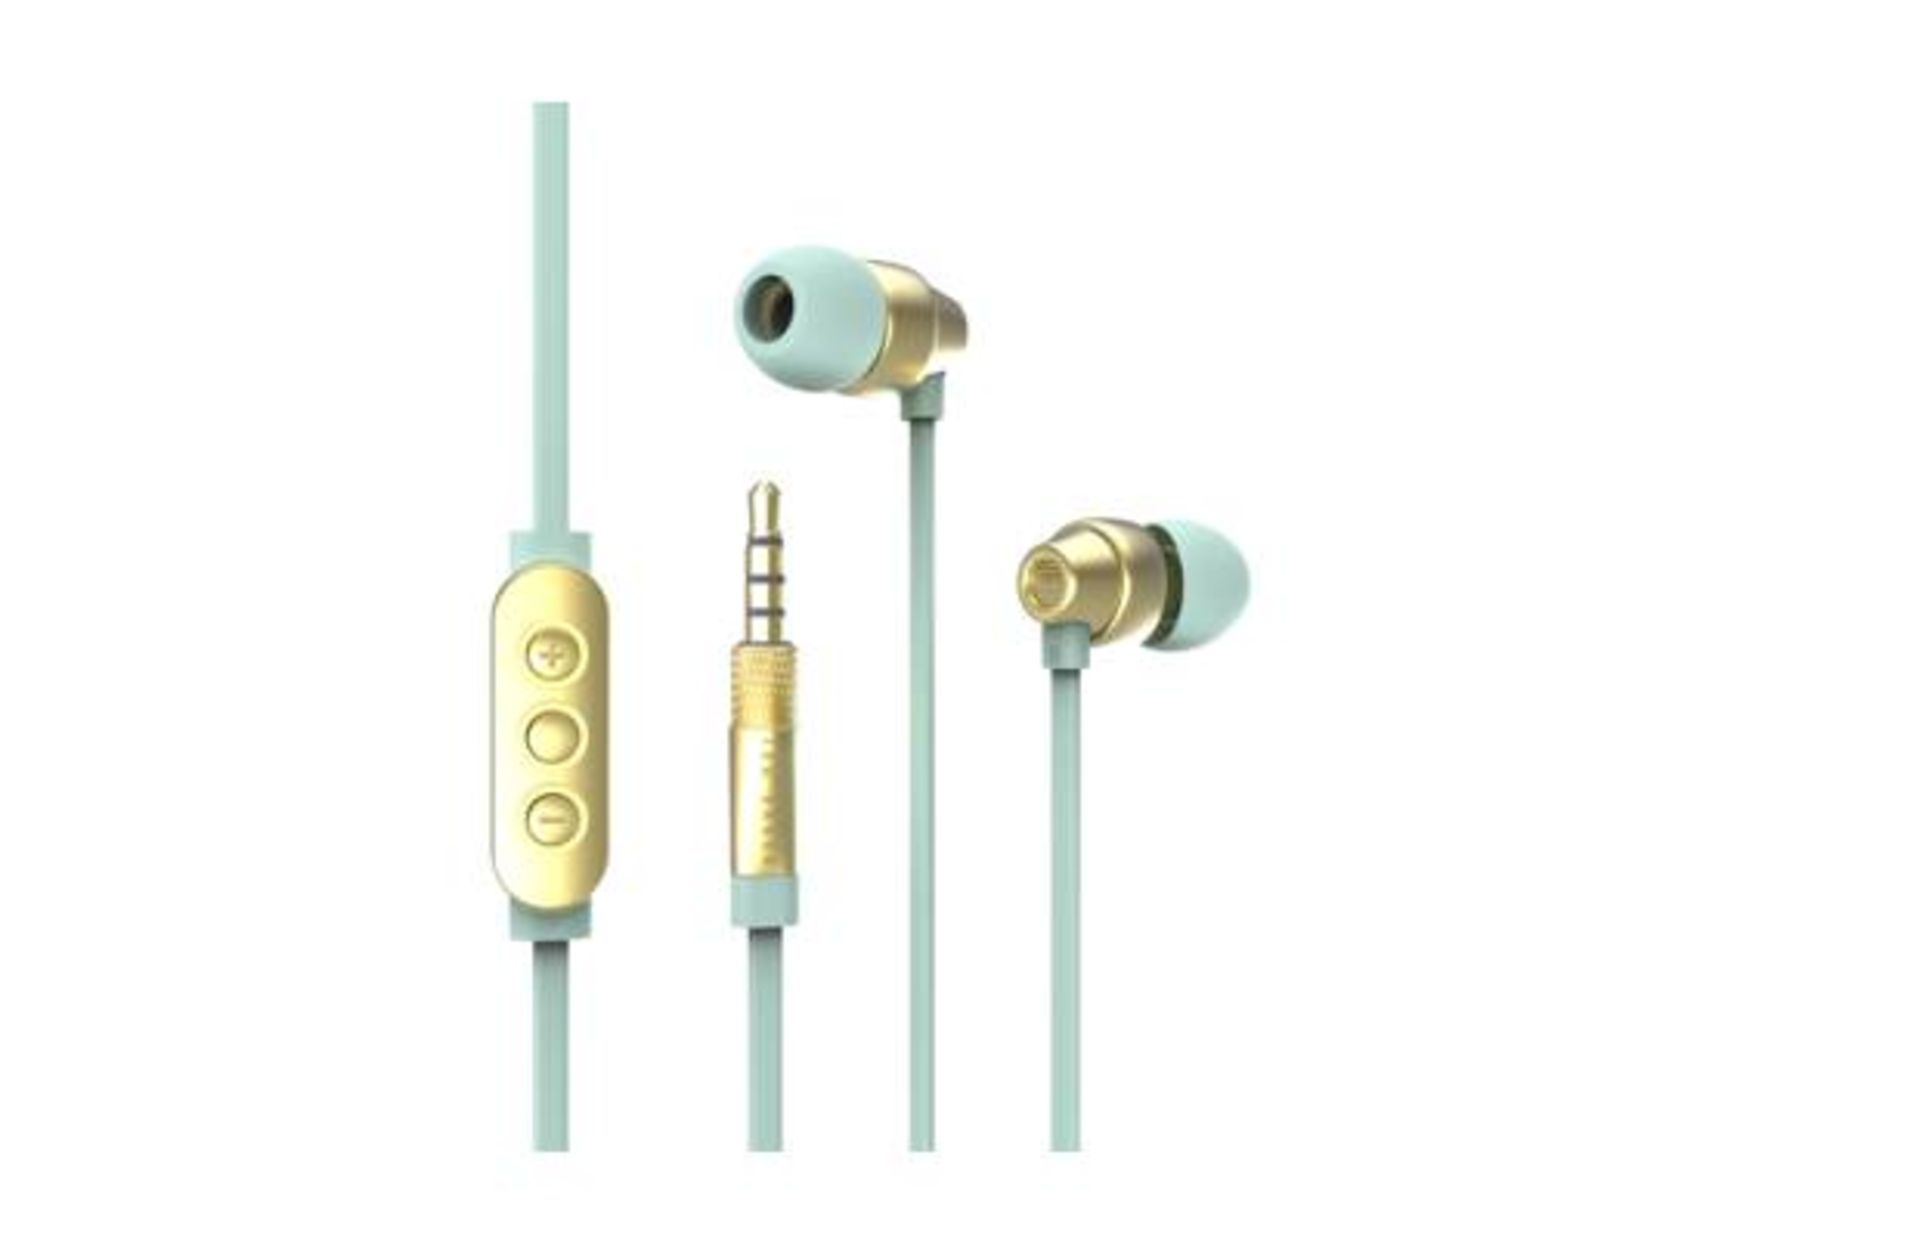 V *TRADE QTY* Brand New Ted Baker Dover In-Ear Headphones In Mint/Gold RRP£59.95 eBay£39.99 X 6 YOUR